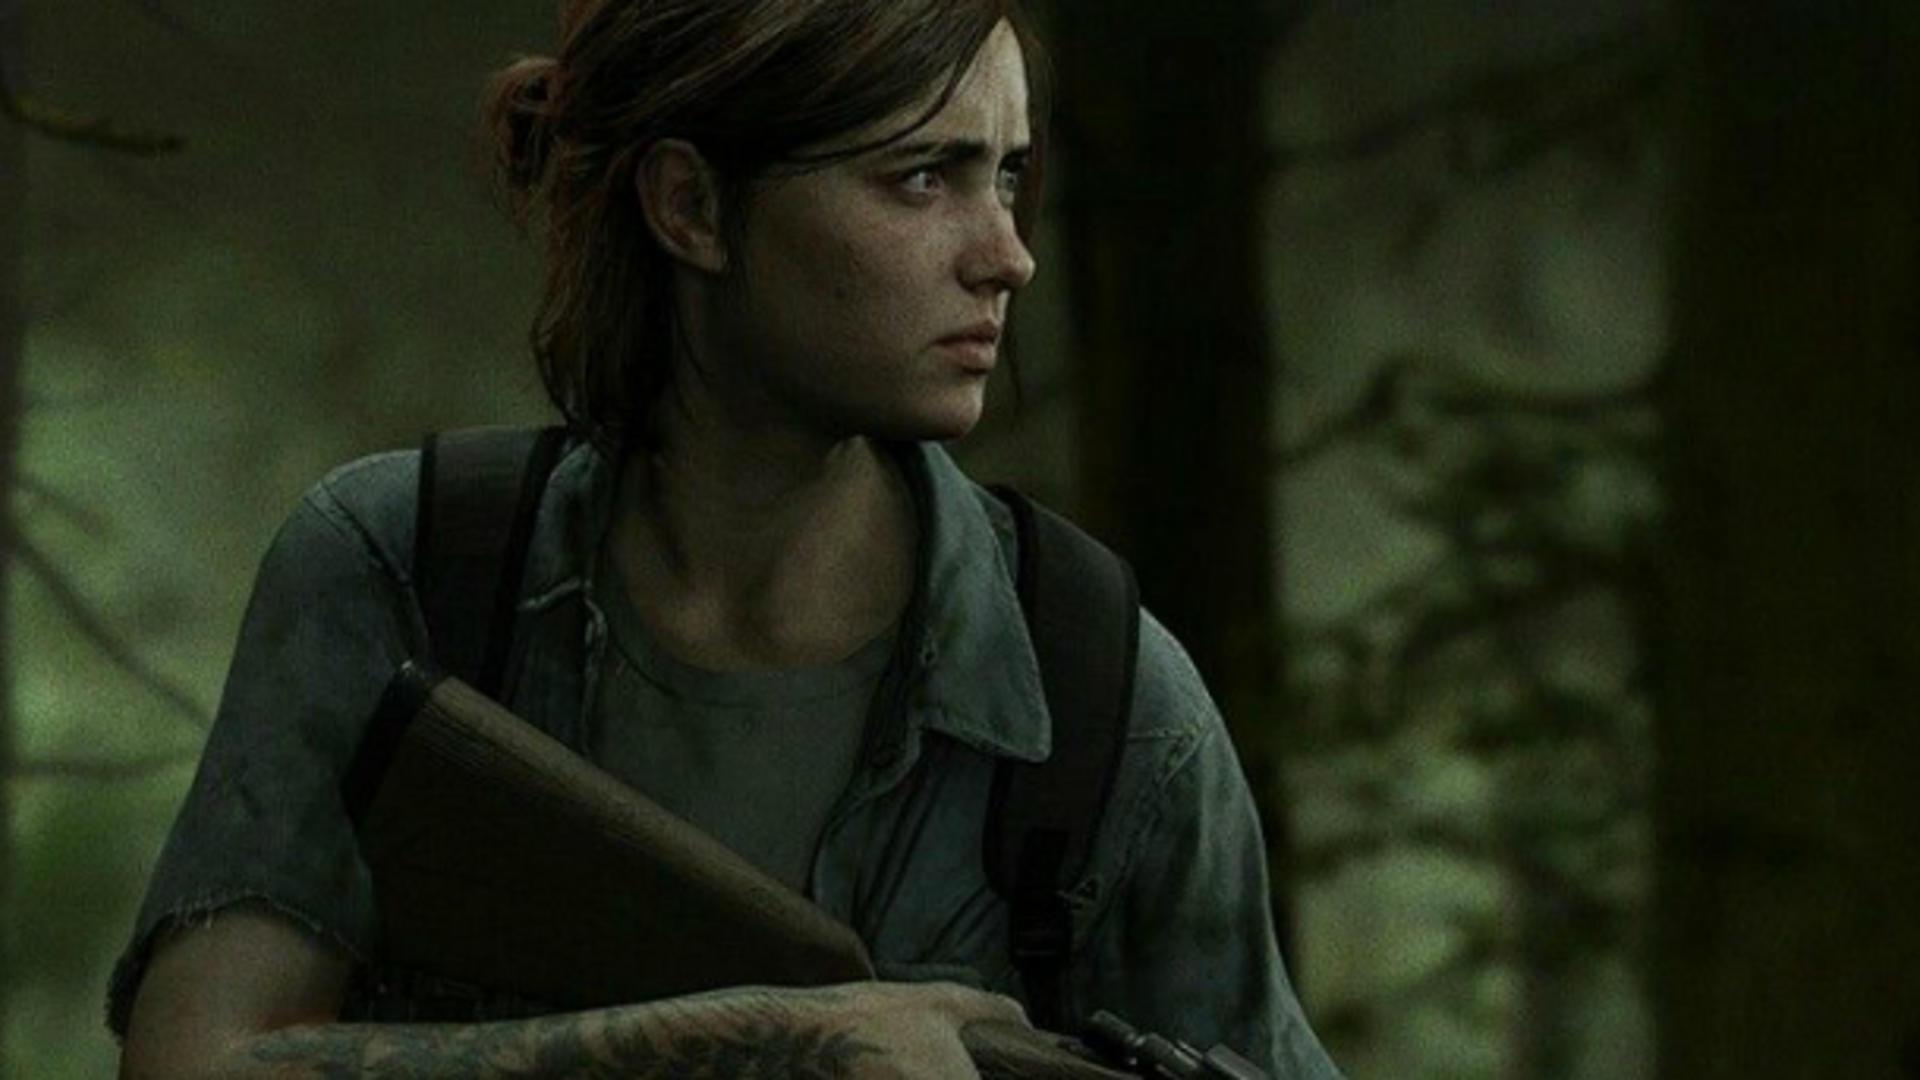 The Last Of Us Part 2 Features Nudity & Sexual Content, Is A First